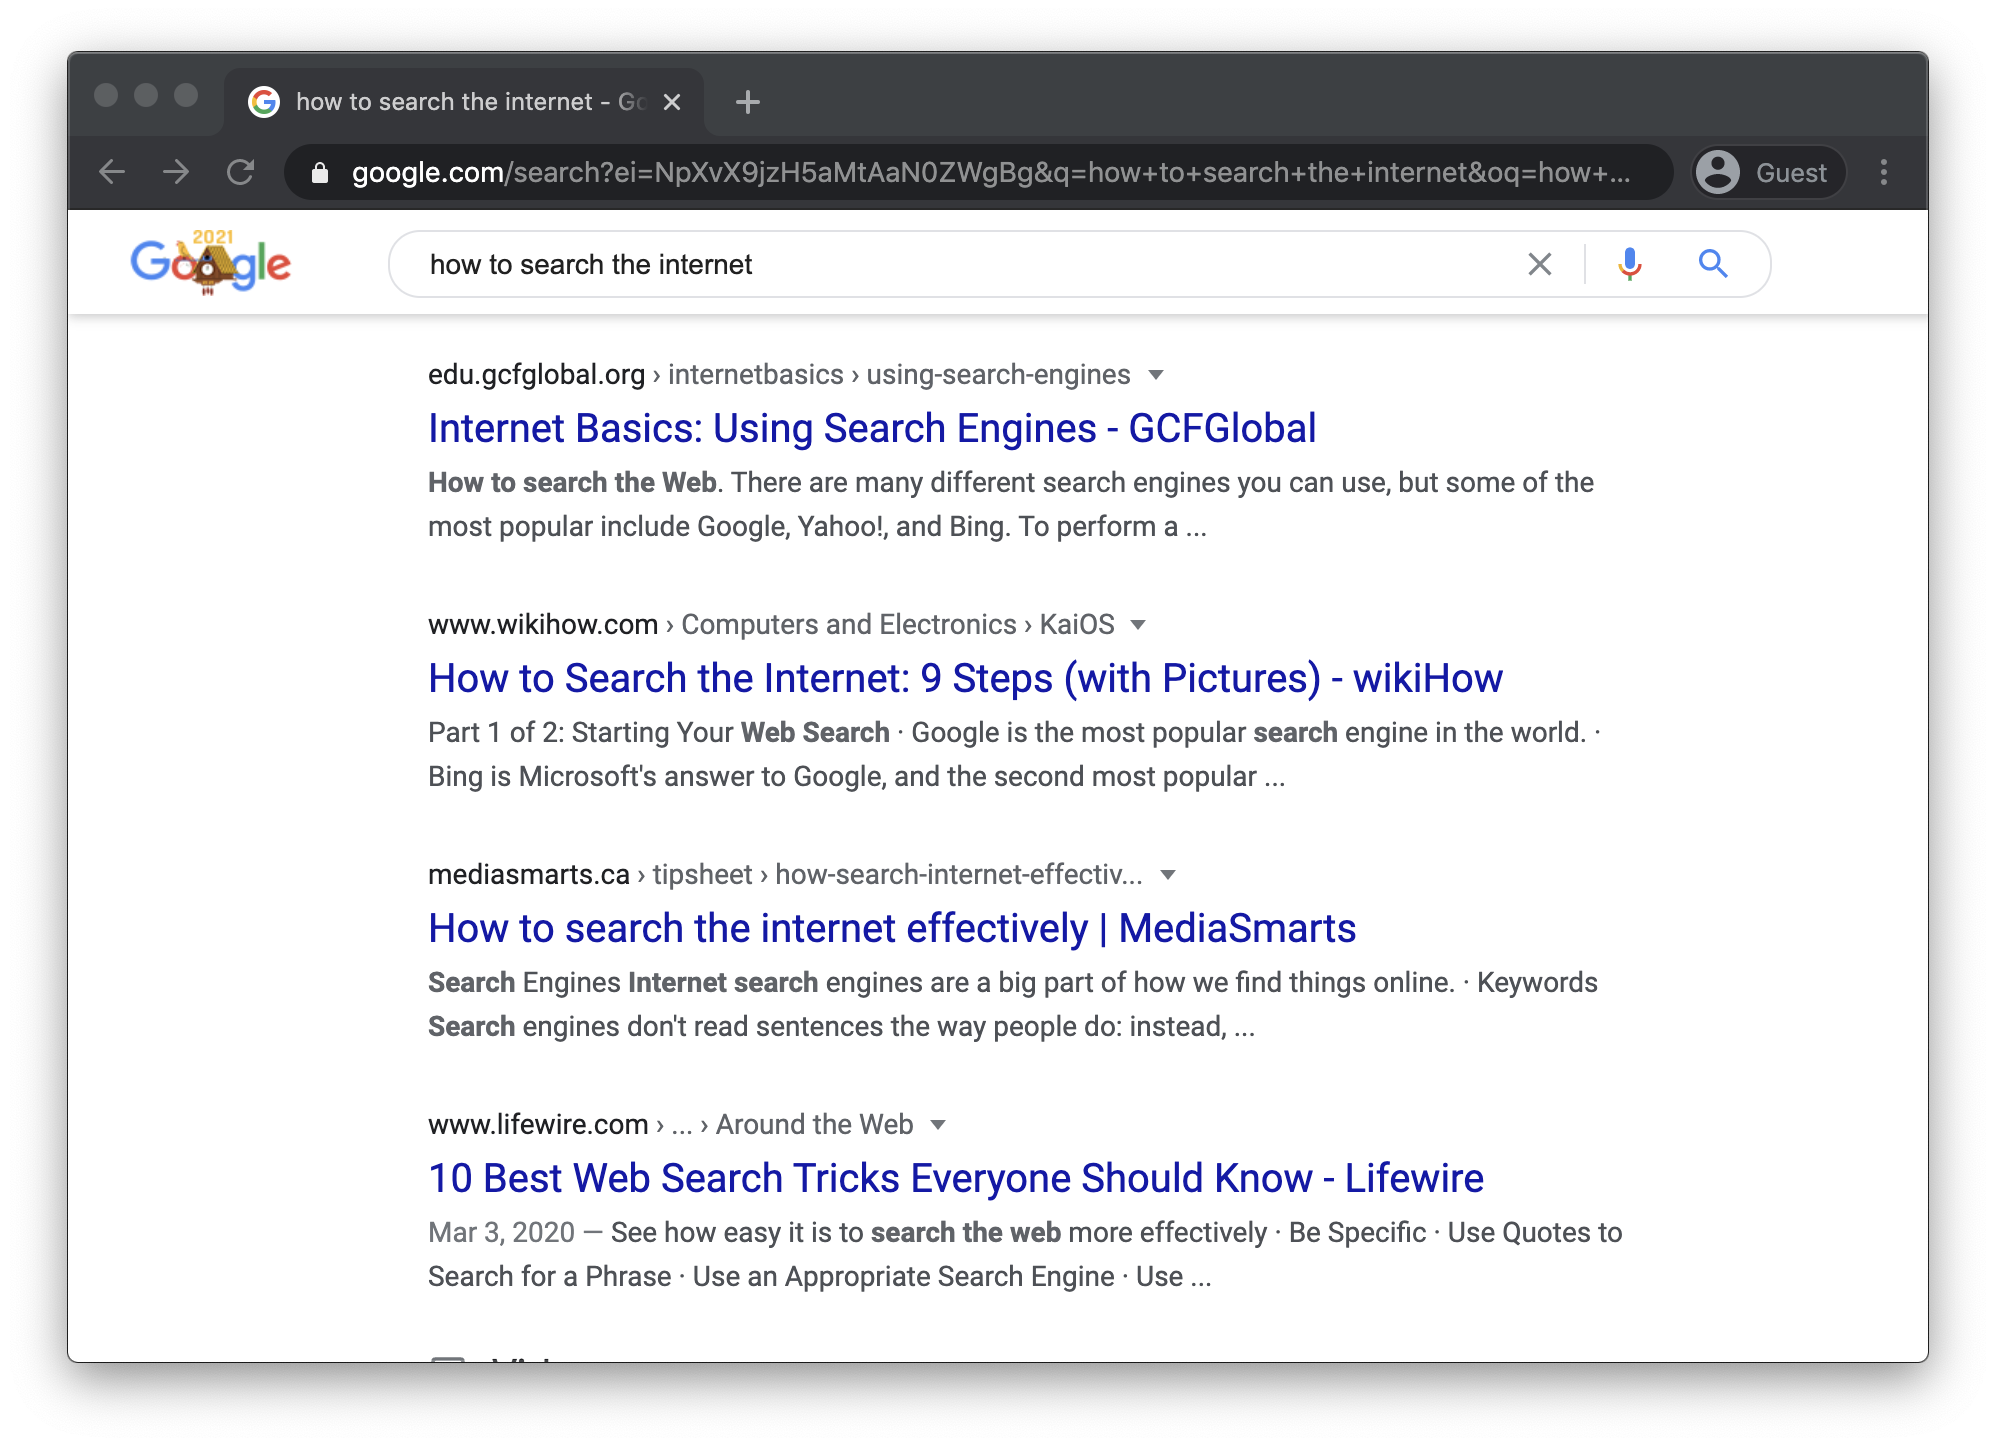 A Google search for 'how to search the internet'